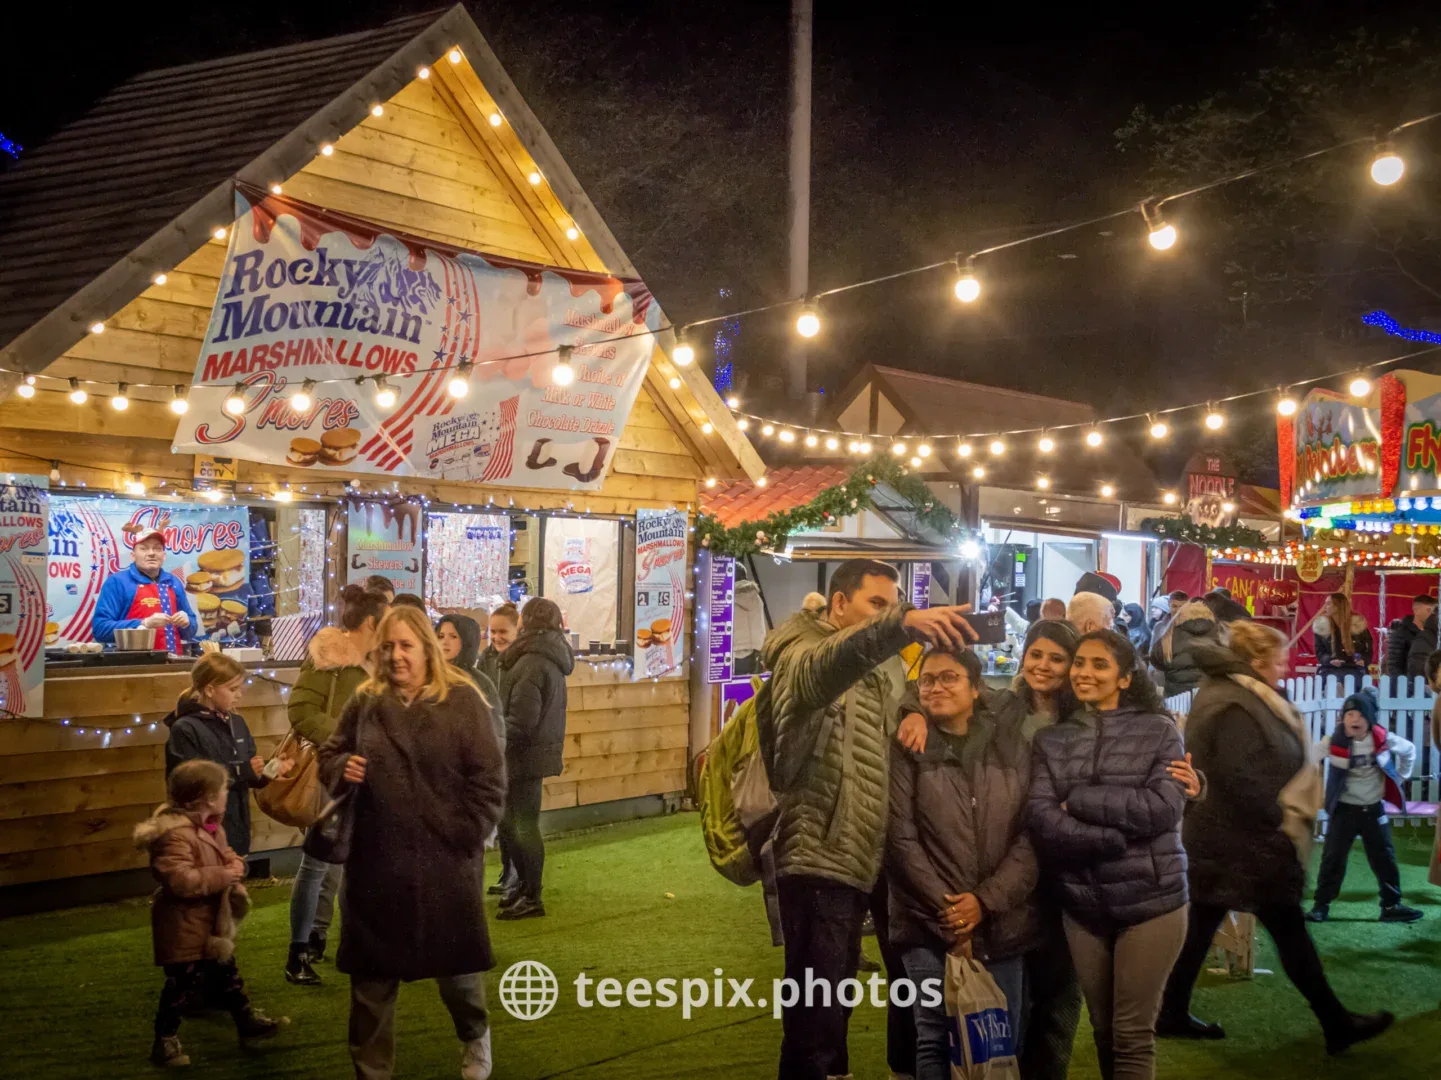 Middlesbrough Christmas Lights Switch On event showing a food stall with crowds around.